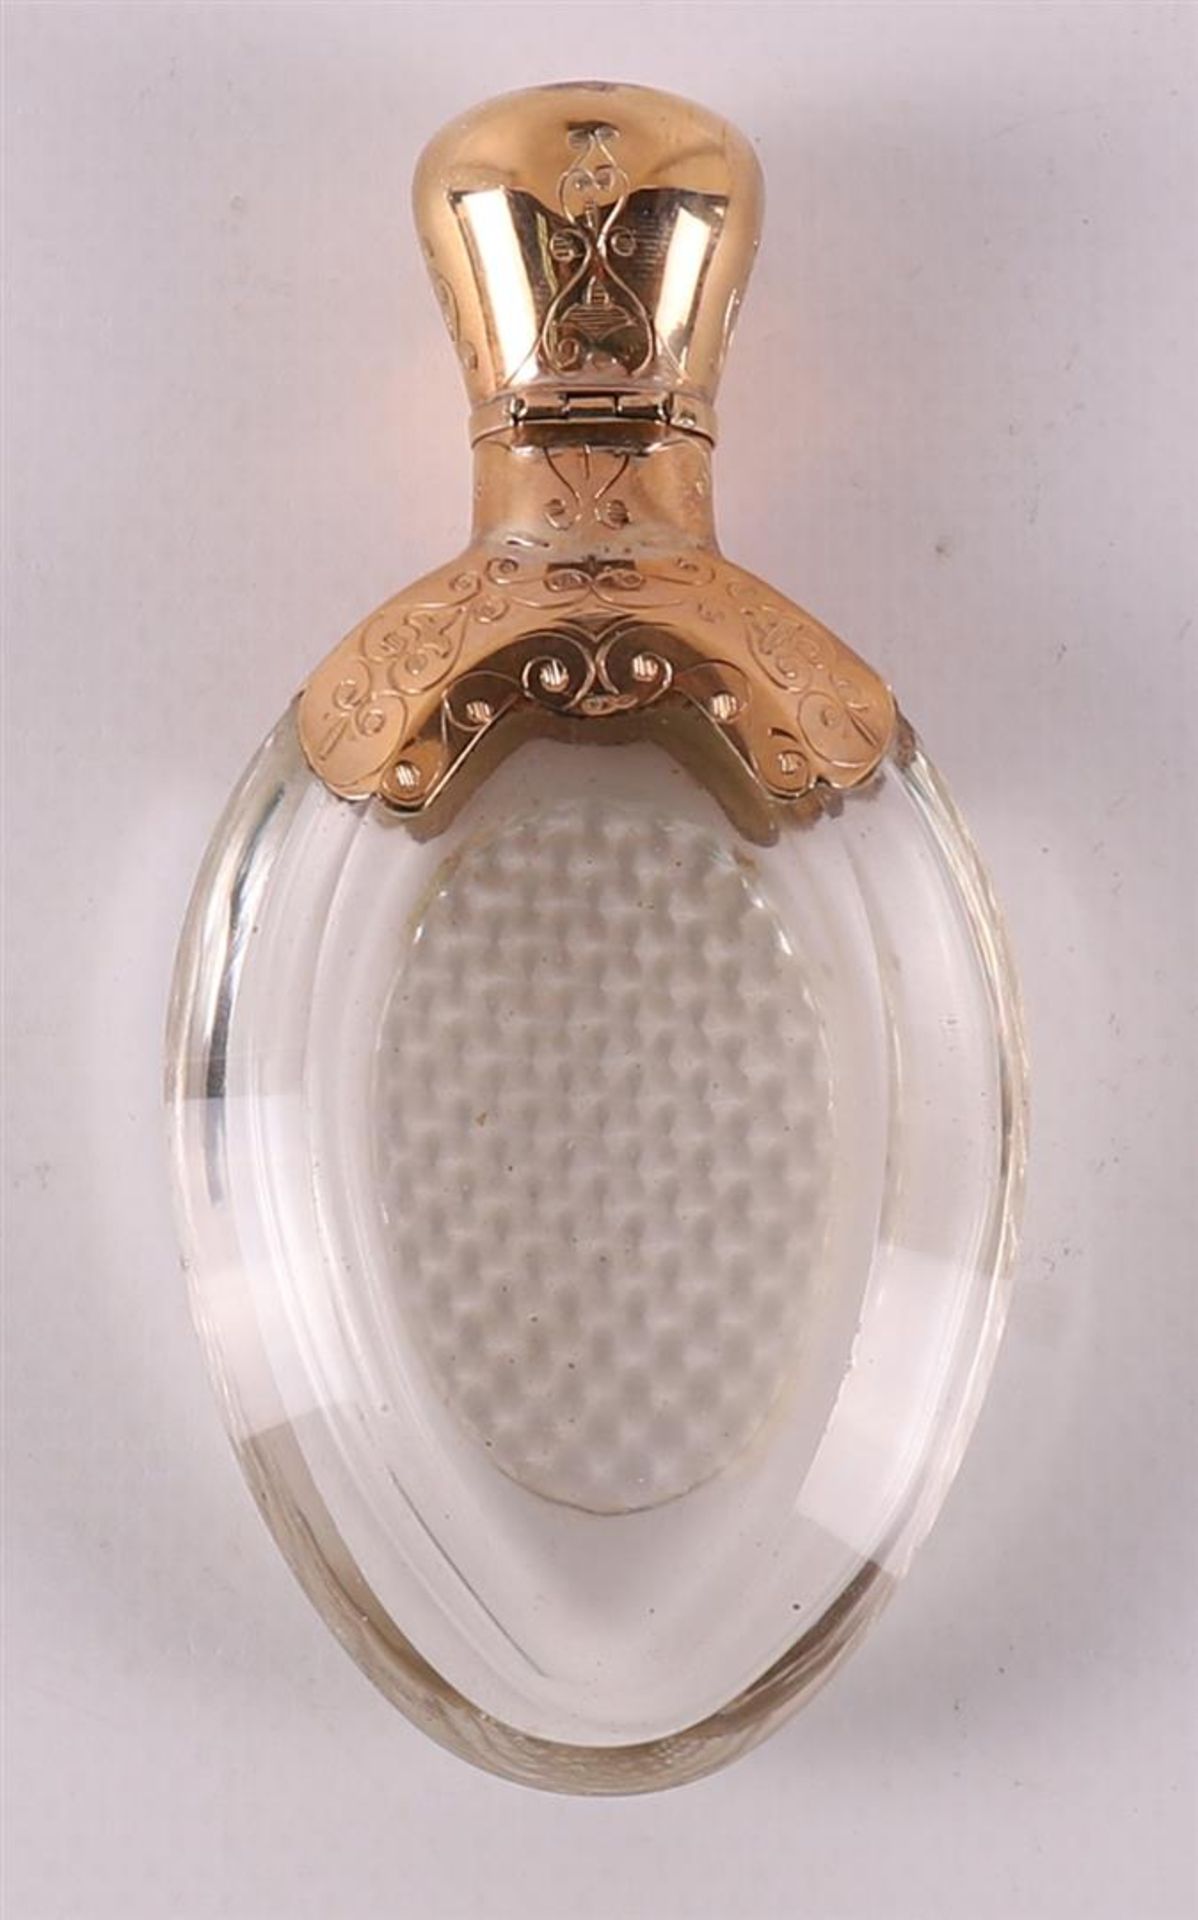 A clear crystal odor flask with gold lid and frame, around 1900 - Bild 3 aus 8